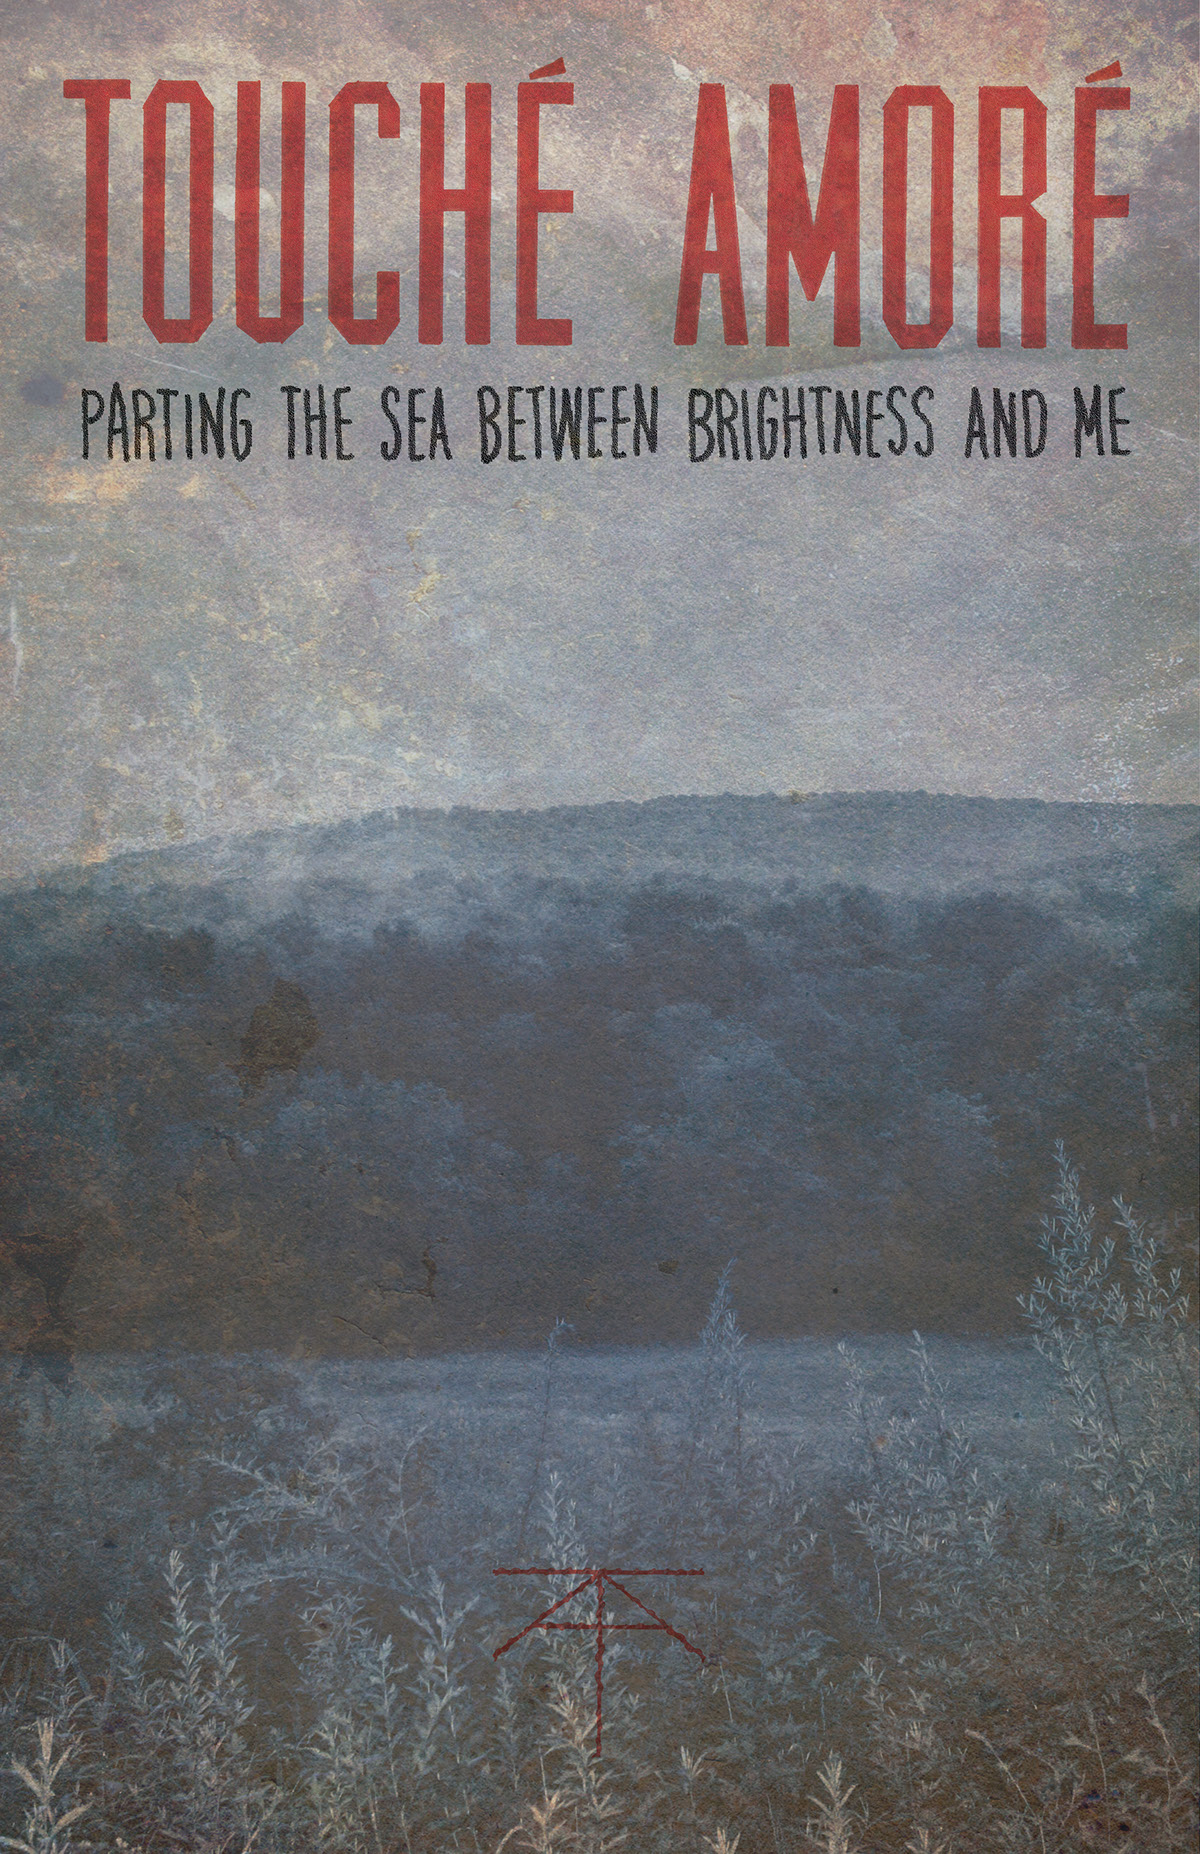 touche amore poster design parting the sea between brightness and me limited edition hand written